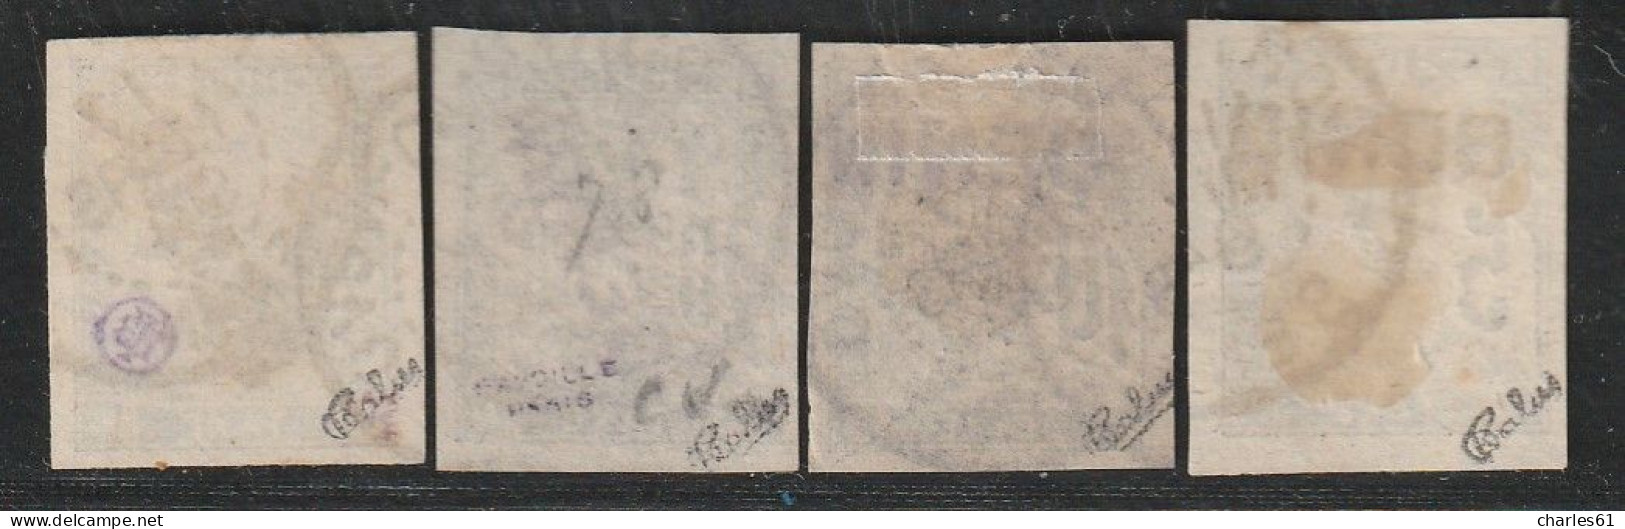 BENIN - Timbres-Taxe N°1 à 4 Obl (1894) Signé Calves - Used Stamps